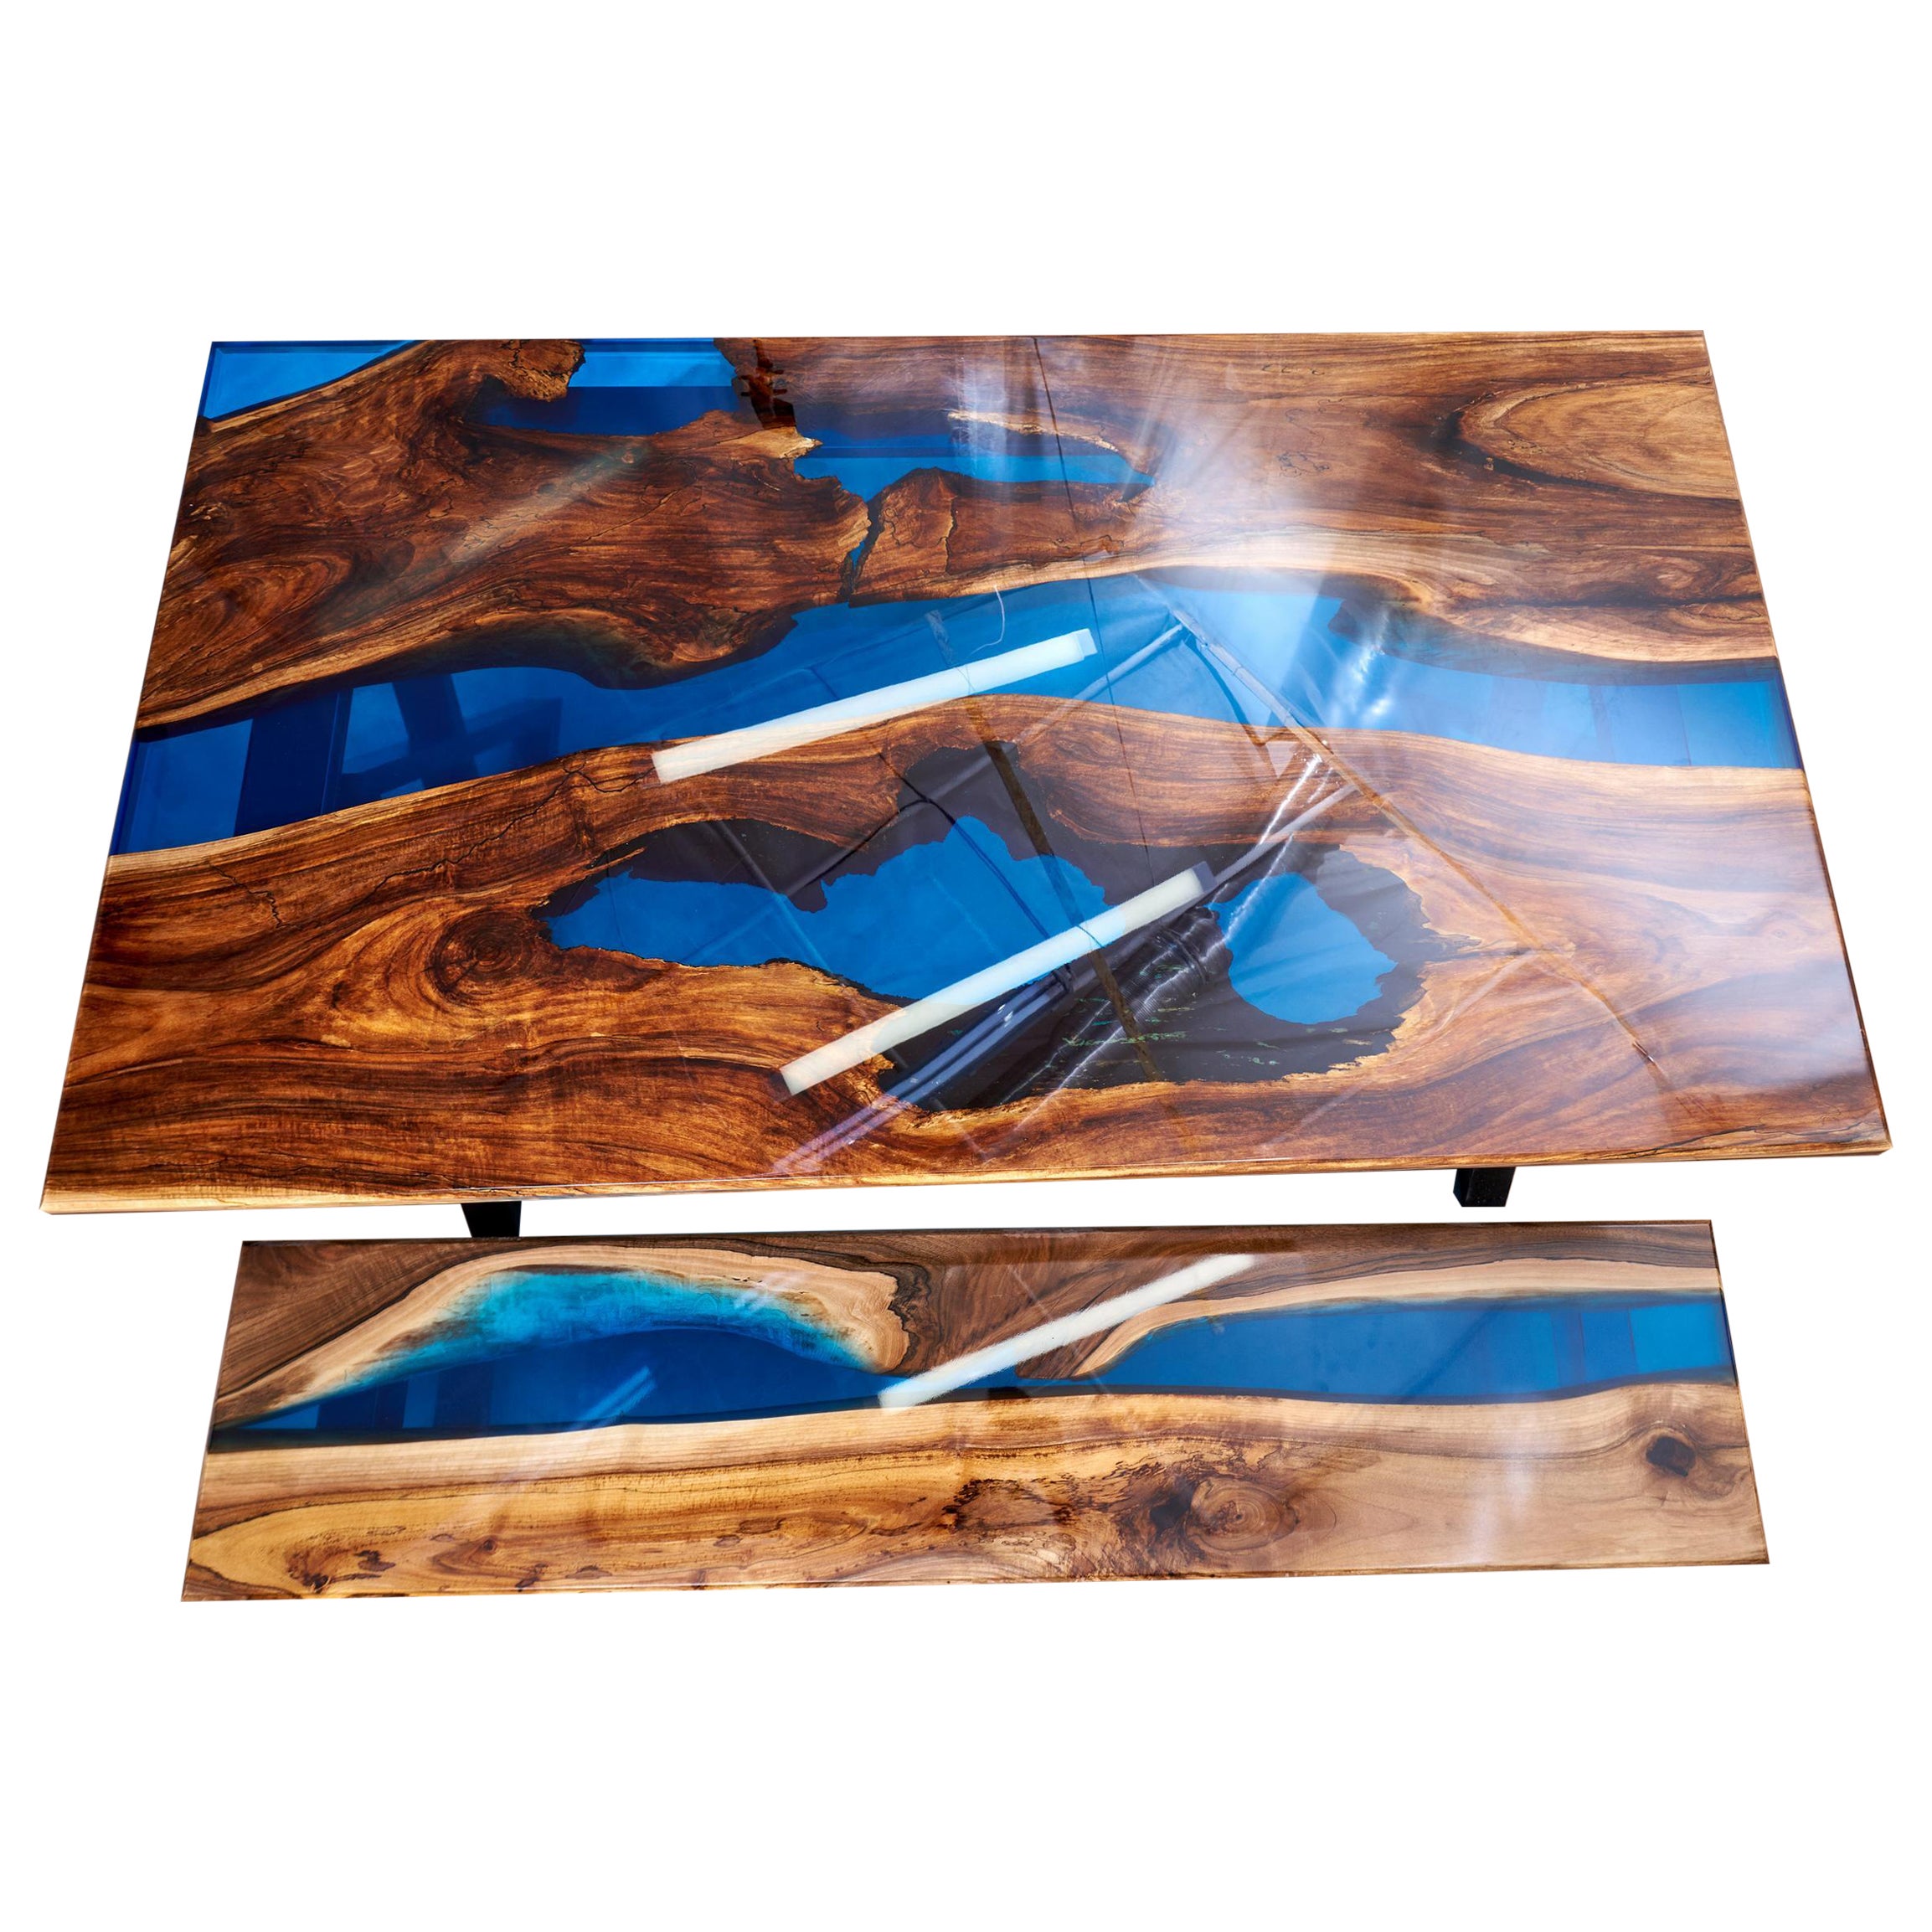 When I made this table, the main challenge was to find really old walnut slabs. So that they would be dark, with a rich dark vein, a little rotten and with lots of holes and cracks. The resin color had to be a clear blue and it's cool to find wood